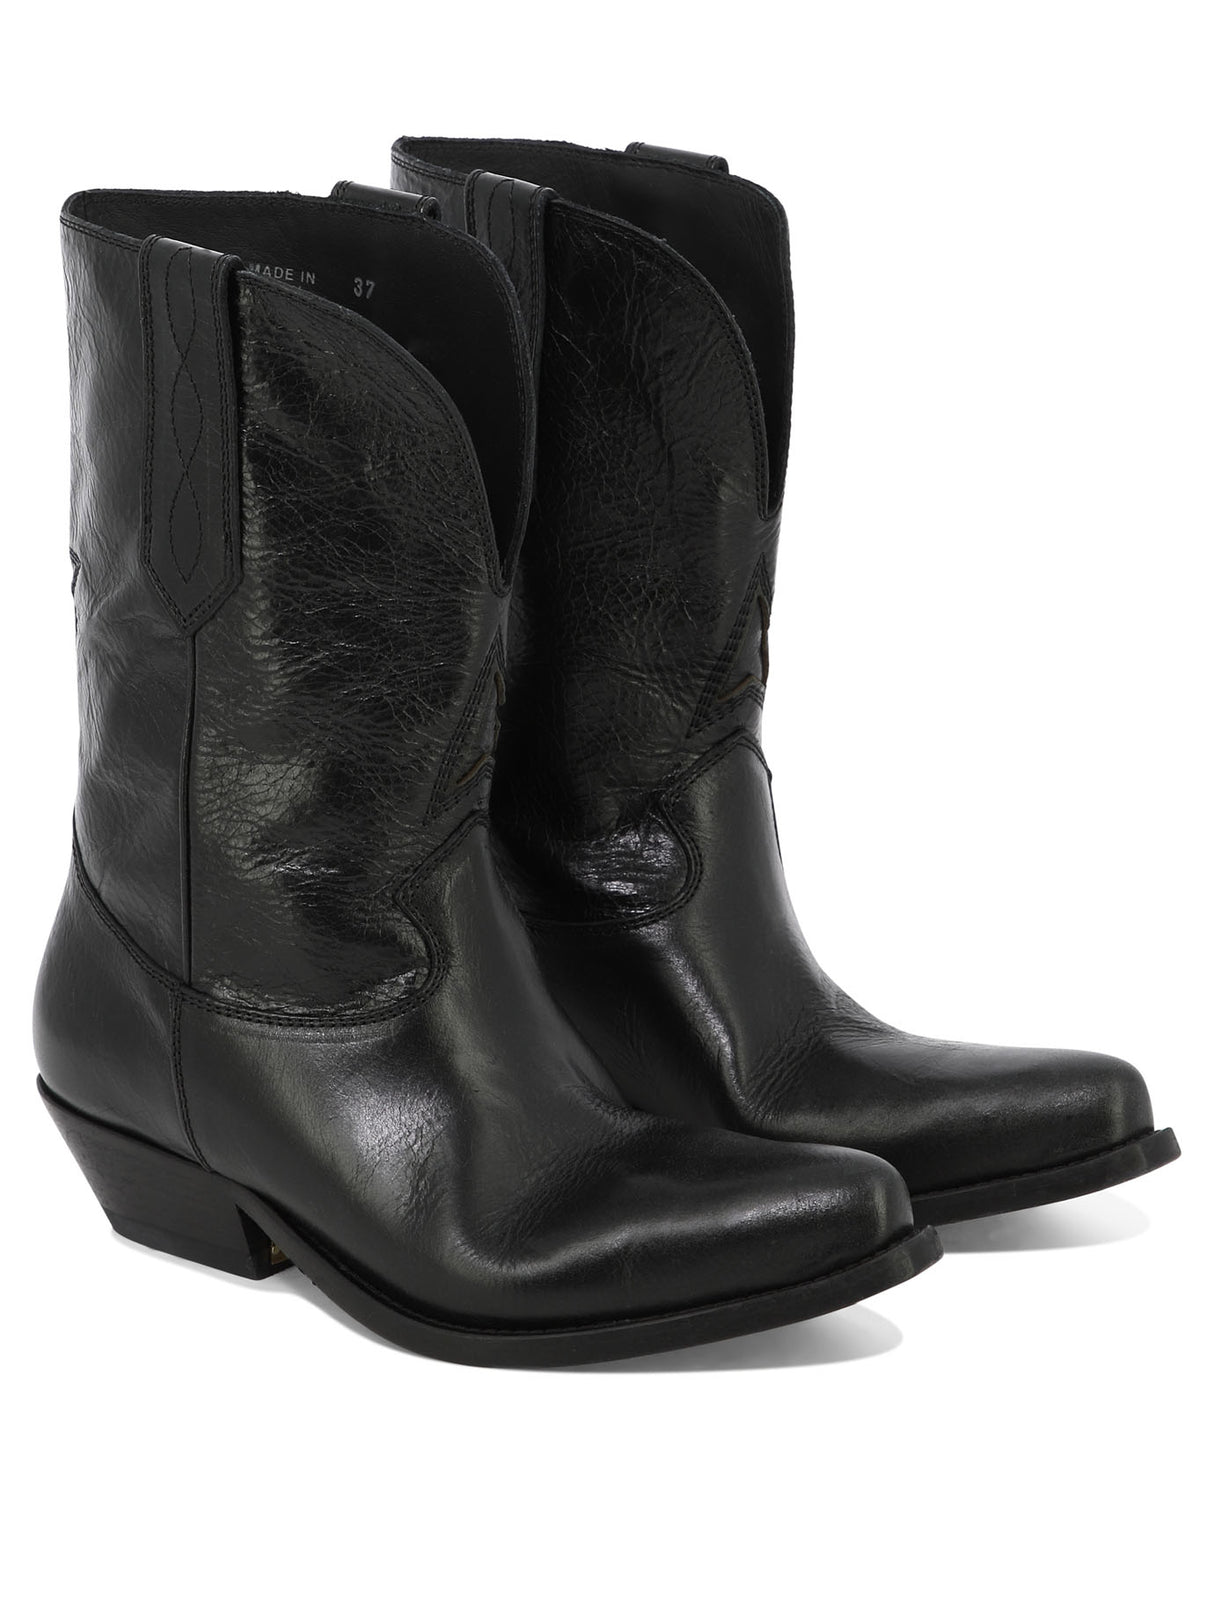 GOLDEN GOOSE Wish Star Cowboy Boots for Women in Black for SS24